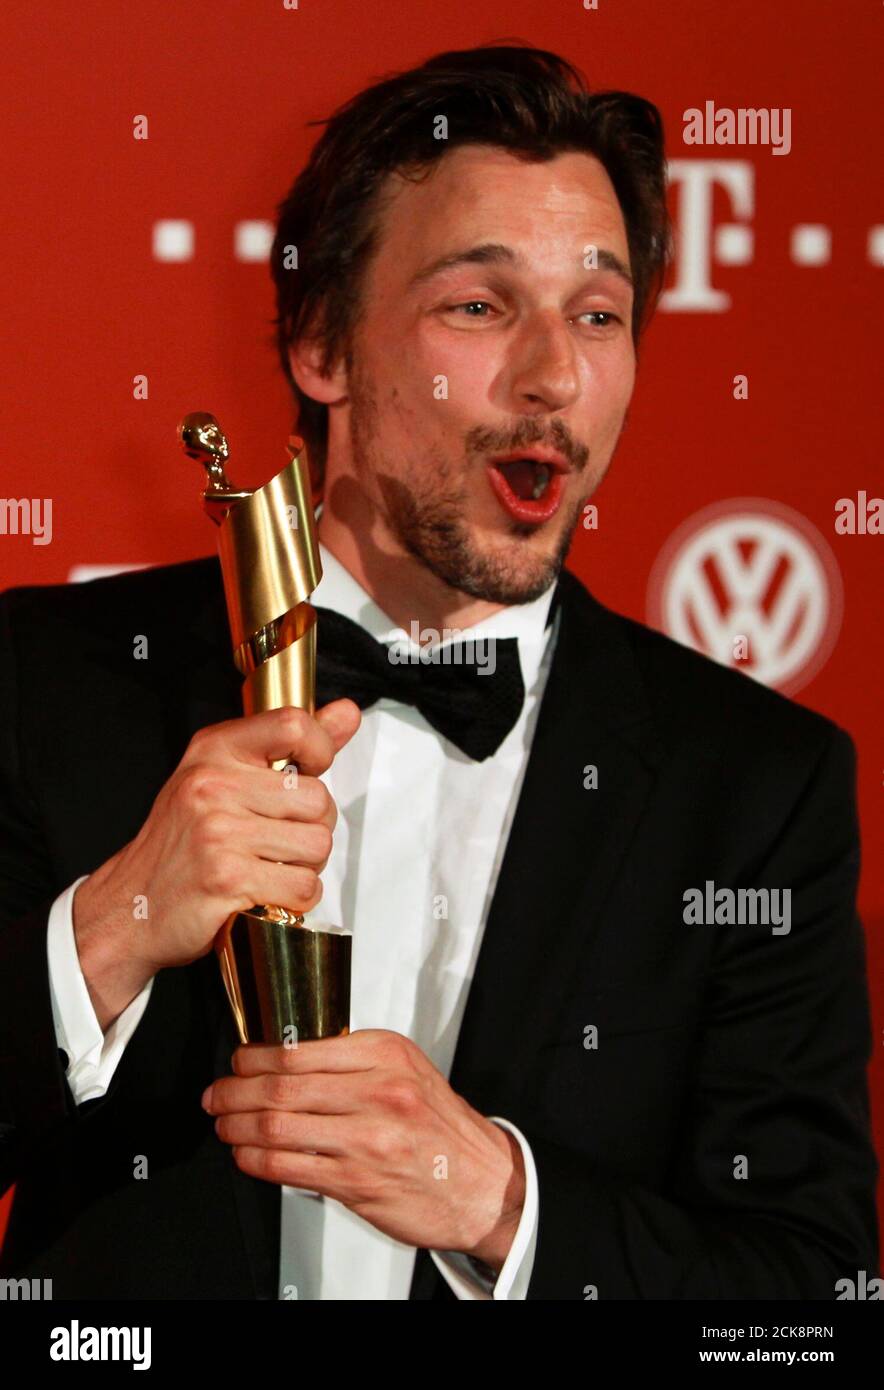 German actor Florian David Fitz poses with the award for the best male role in the movie 'Vincent will meer' during the German Film Prize (Lola) ceremony in Berlin, April 8, 2011.             REUTERS/Thomas Peter (GERMANY  - Tags: ENTERTAINMENT SOCIETY) Stock Photo